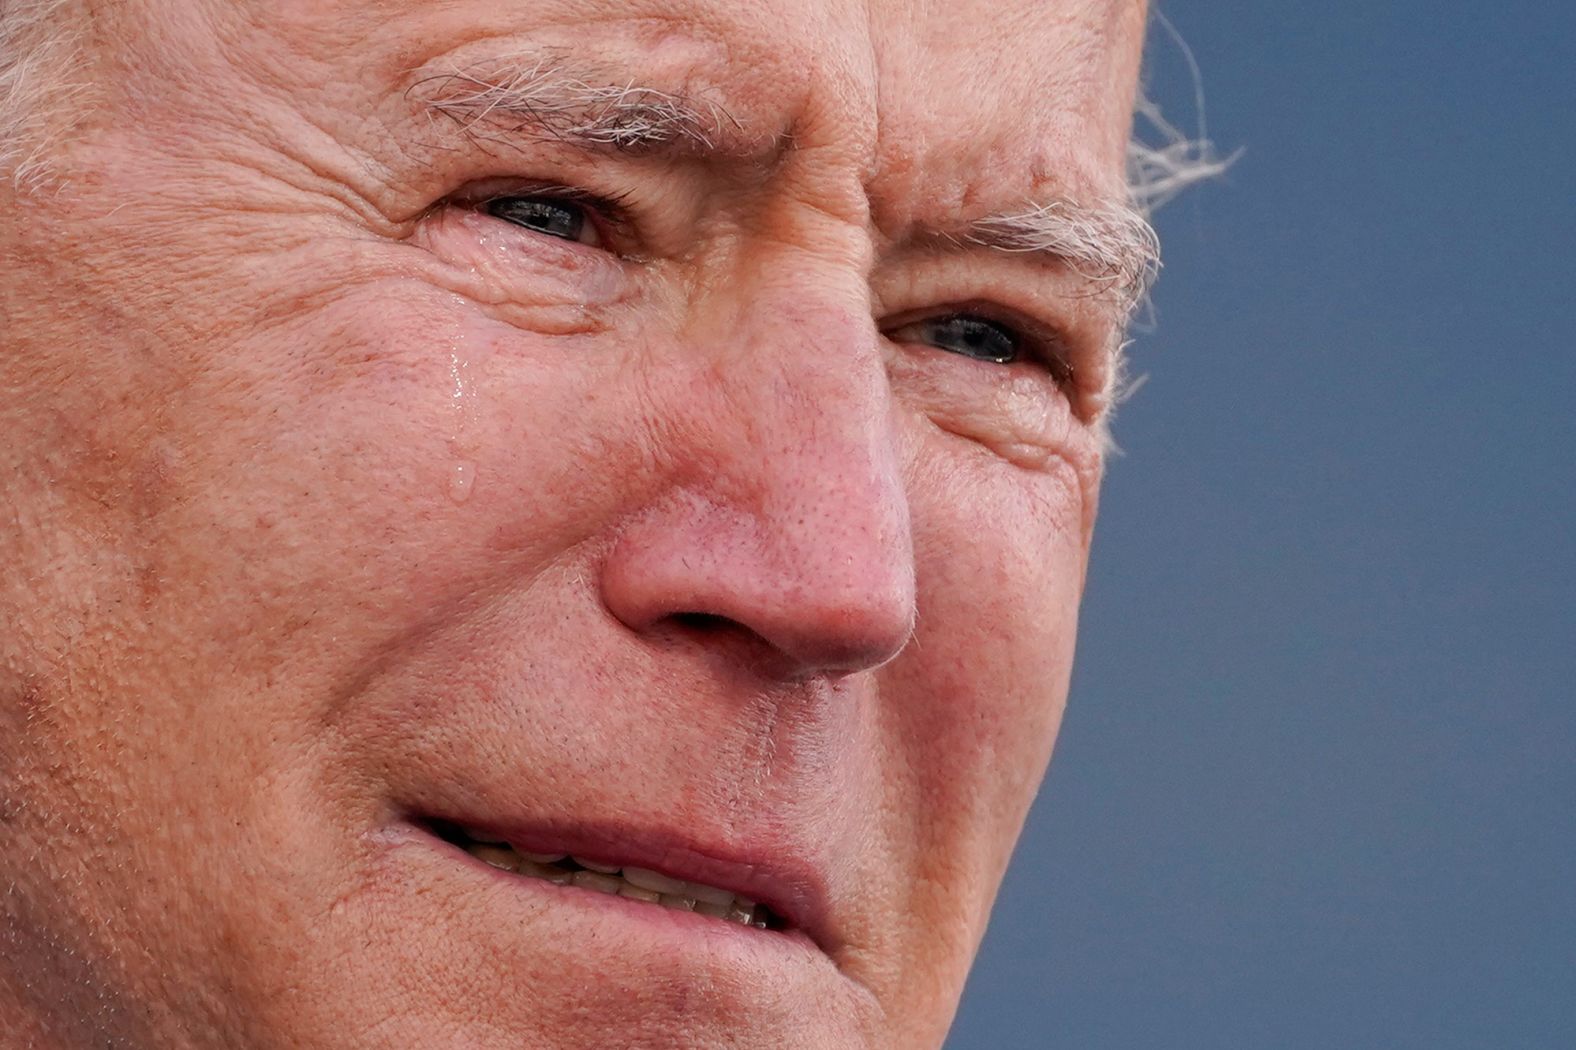 Biden tears up in New Castle, Delaware, as he speaks about his late son Beau before heading to Washington, DC, on the day before the inauguration. Biden said he was proud to be delivering <a href="index.php?page=&url=https%3A%2F%2Fwww.cnn.com%2Fpolitics%2Flive-news%2Fbiden-inauguration-dc-security-01-19-21%2Fh_a7f0252ff11d798238c580e29f0cb89e" target="_blank">his send-off remarks</a> from the National Guard Center in New Castle, which is named after Beau Biden. "I only have one regret: that he's not here, because we should be introducing him as president," Biden said.